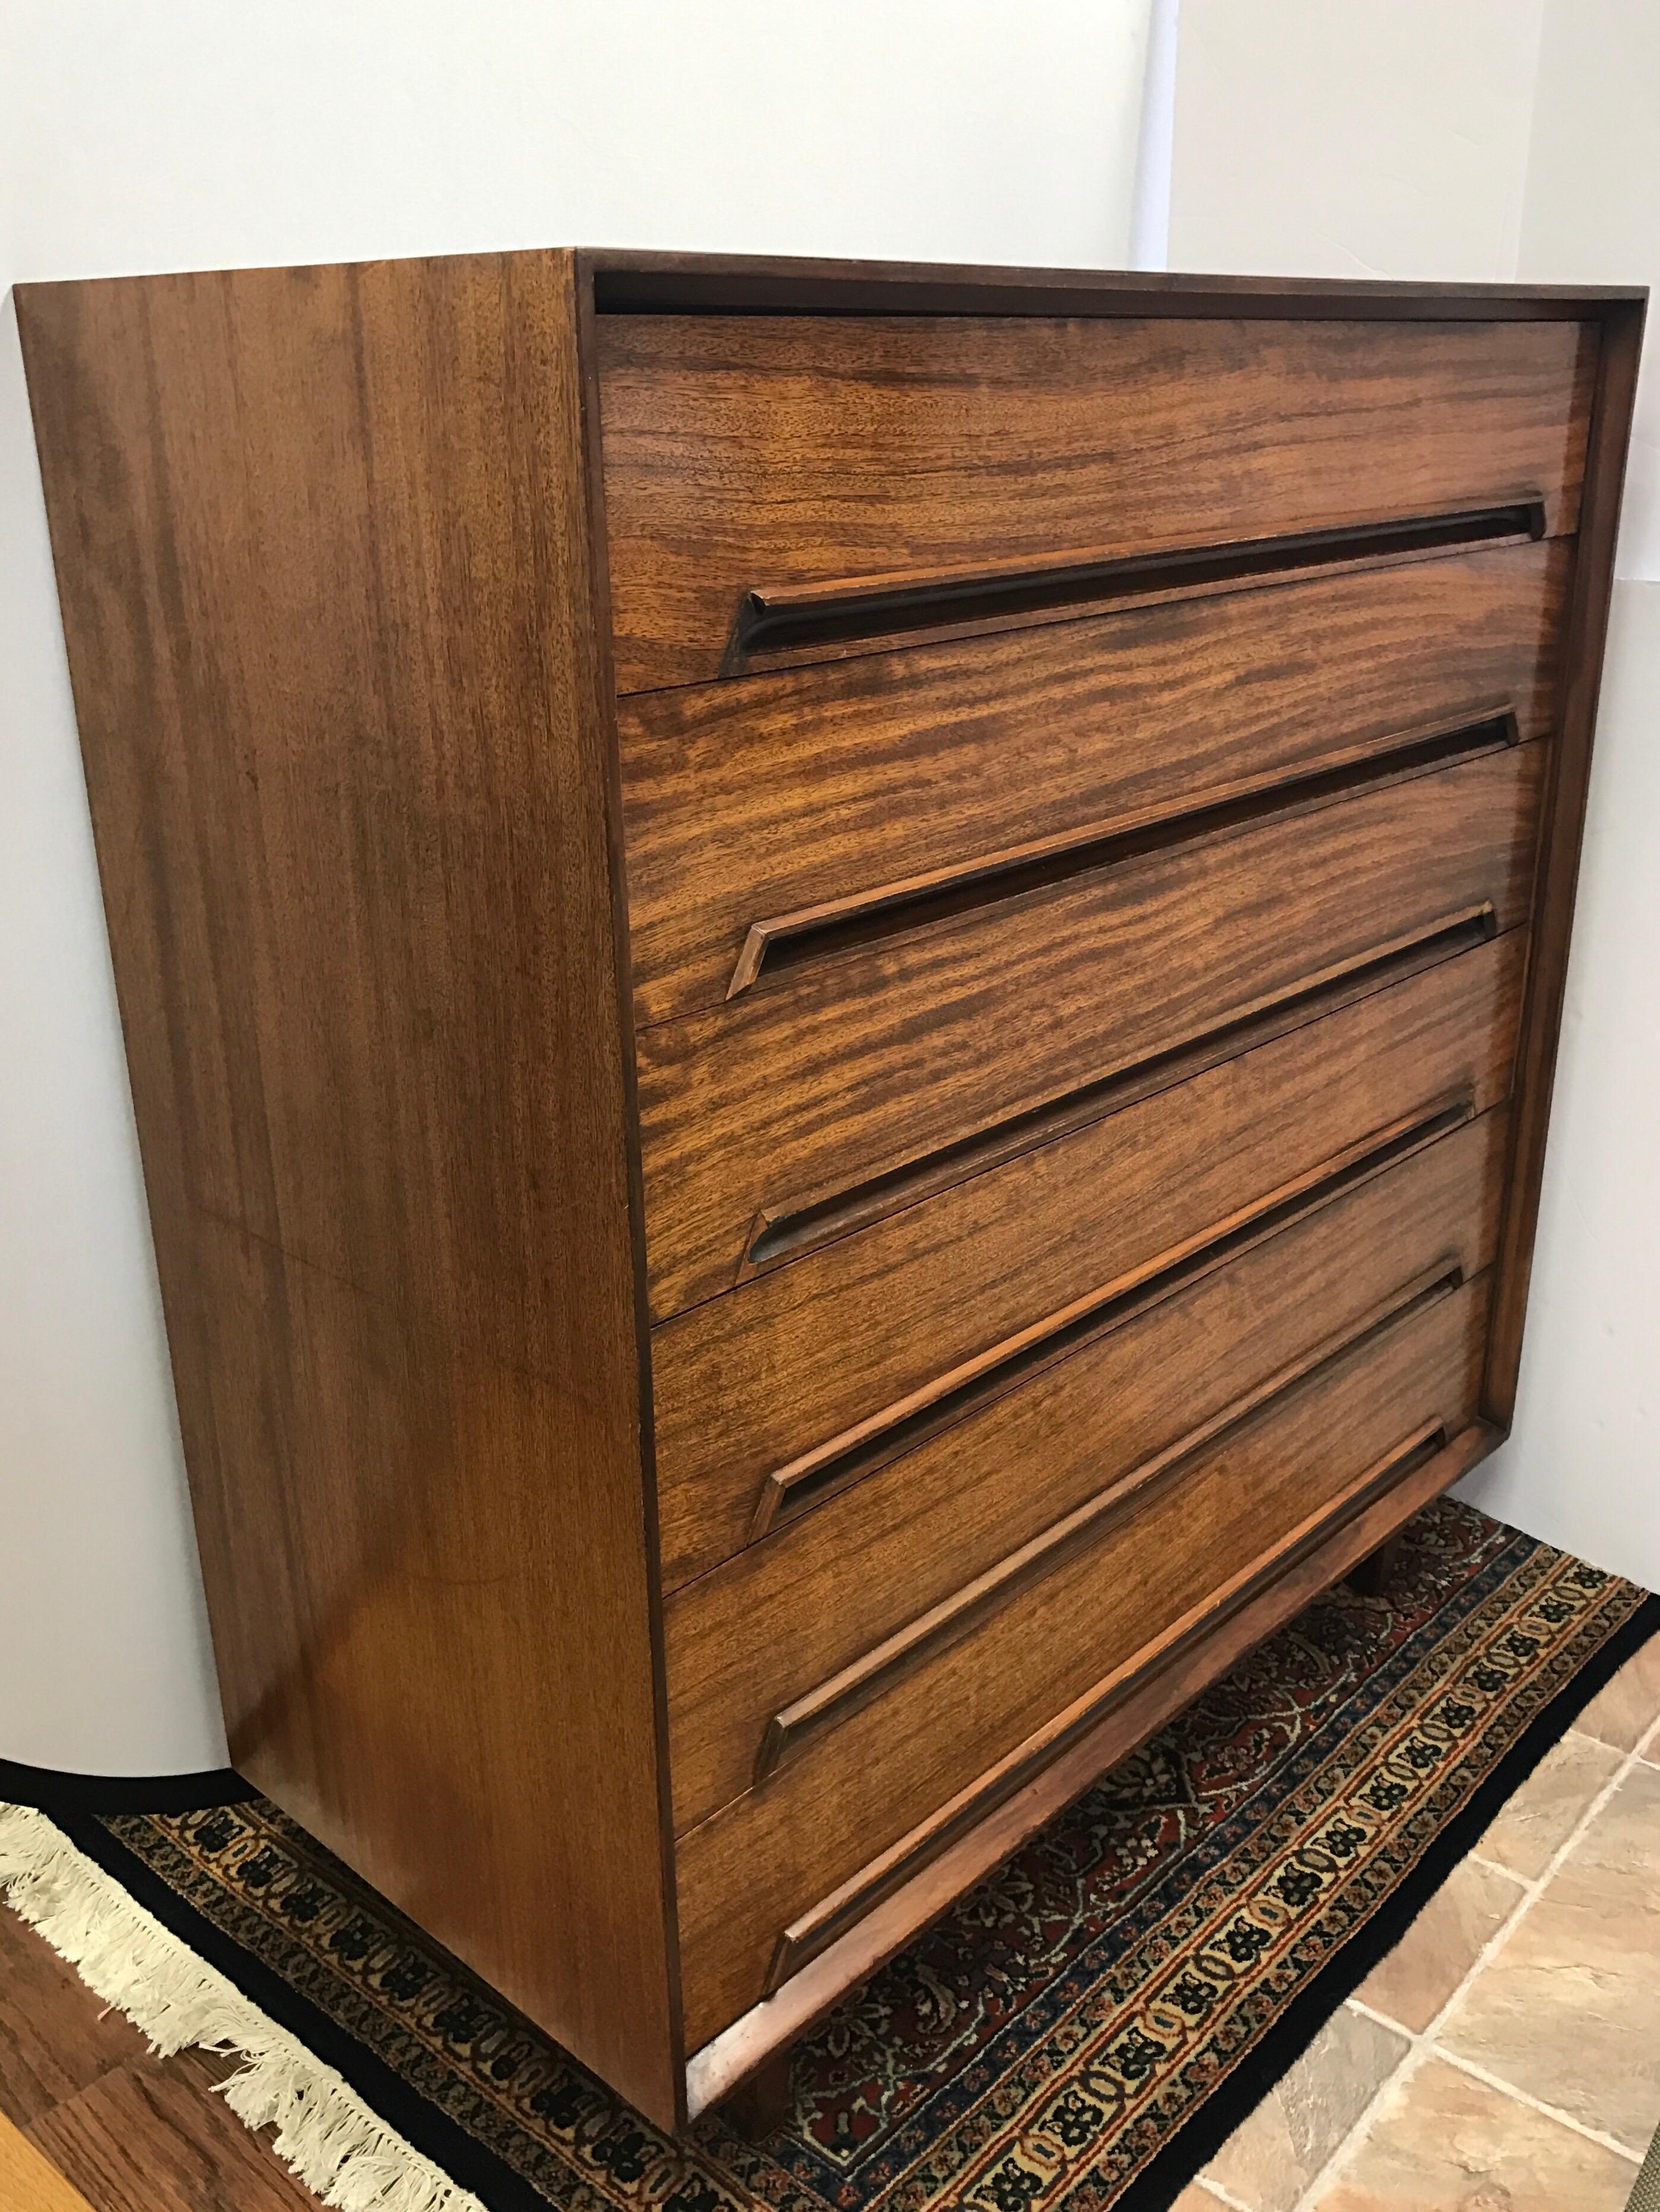 Rare Milo Baughman designed Drexel Perspective tall five-drawer chest of drawers. This mahogany and rosewood chest of drawers is an early Milo Baughman design. The lines are spectacular and we also have the matching lower chest and bed in other